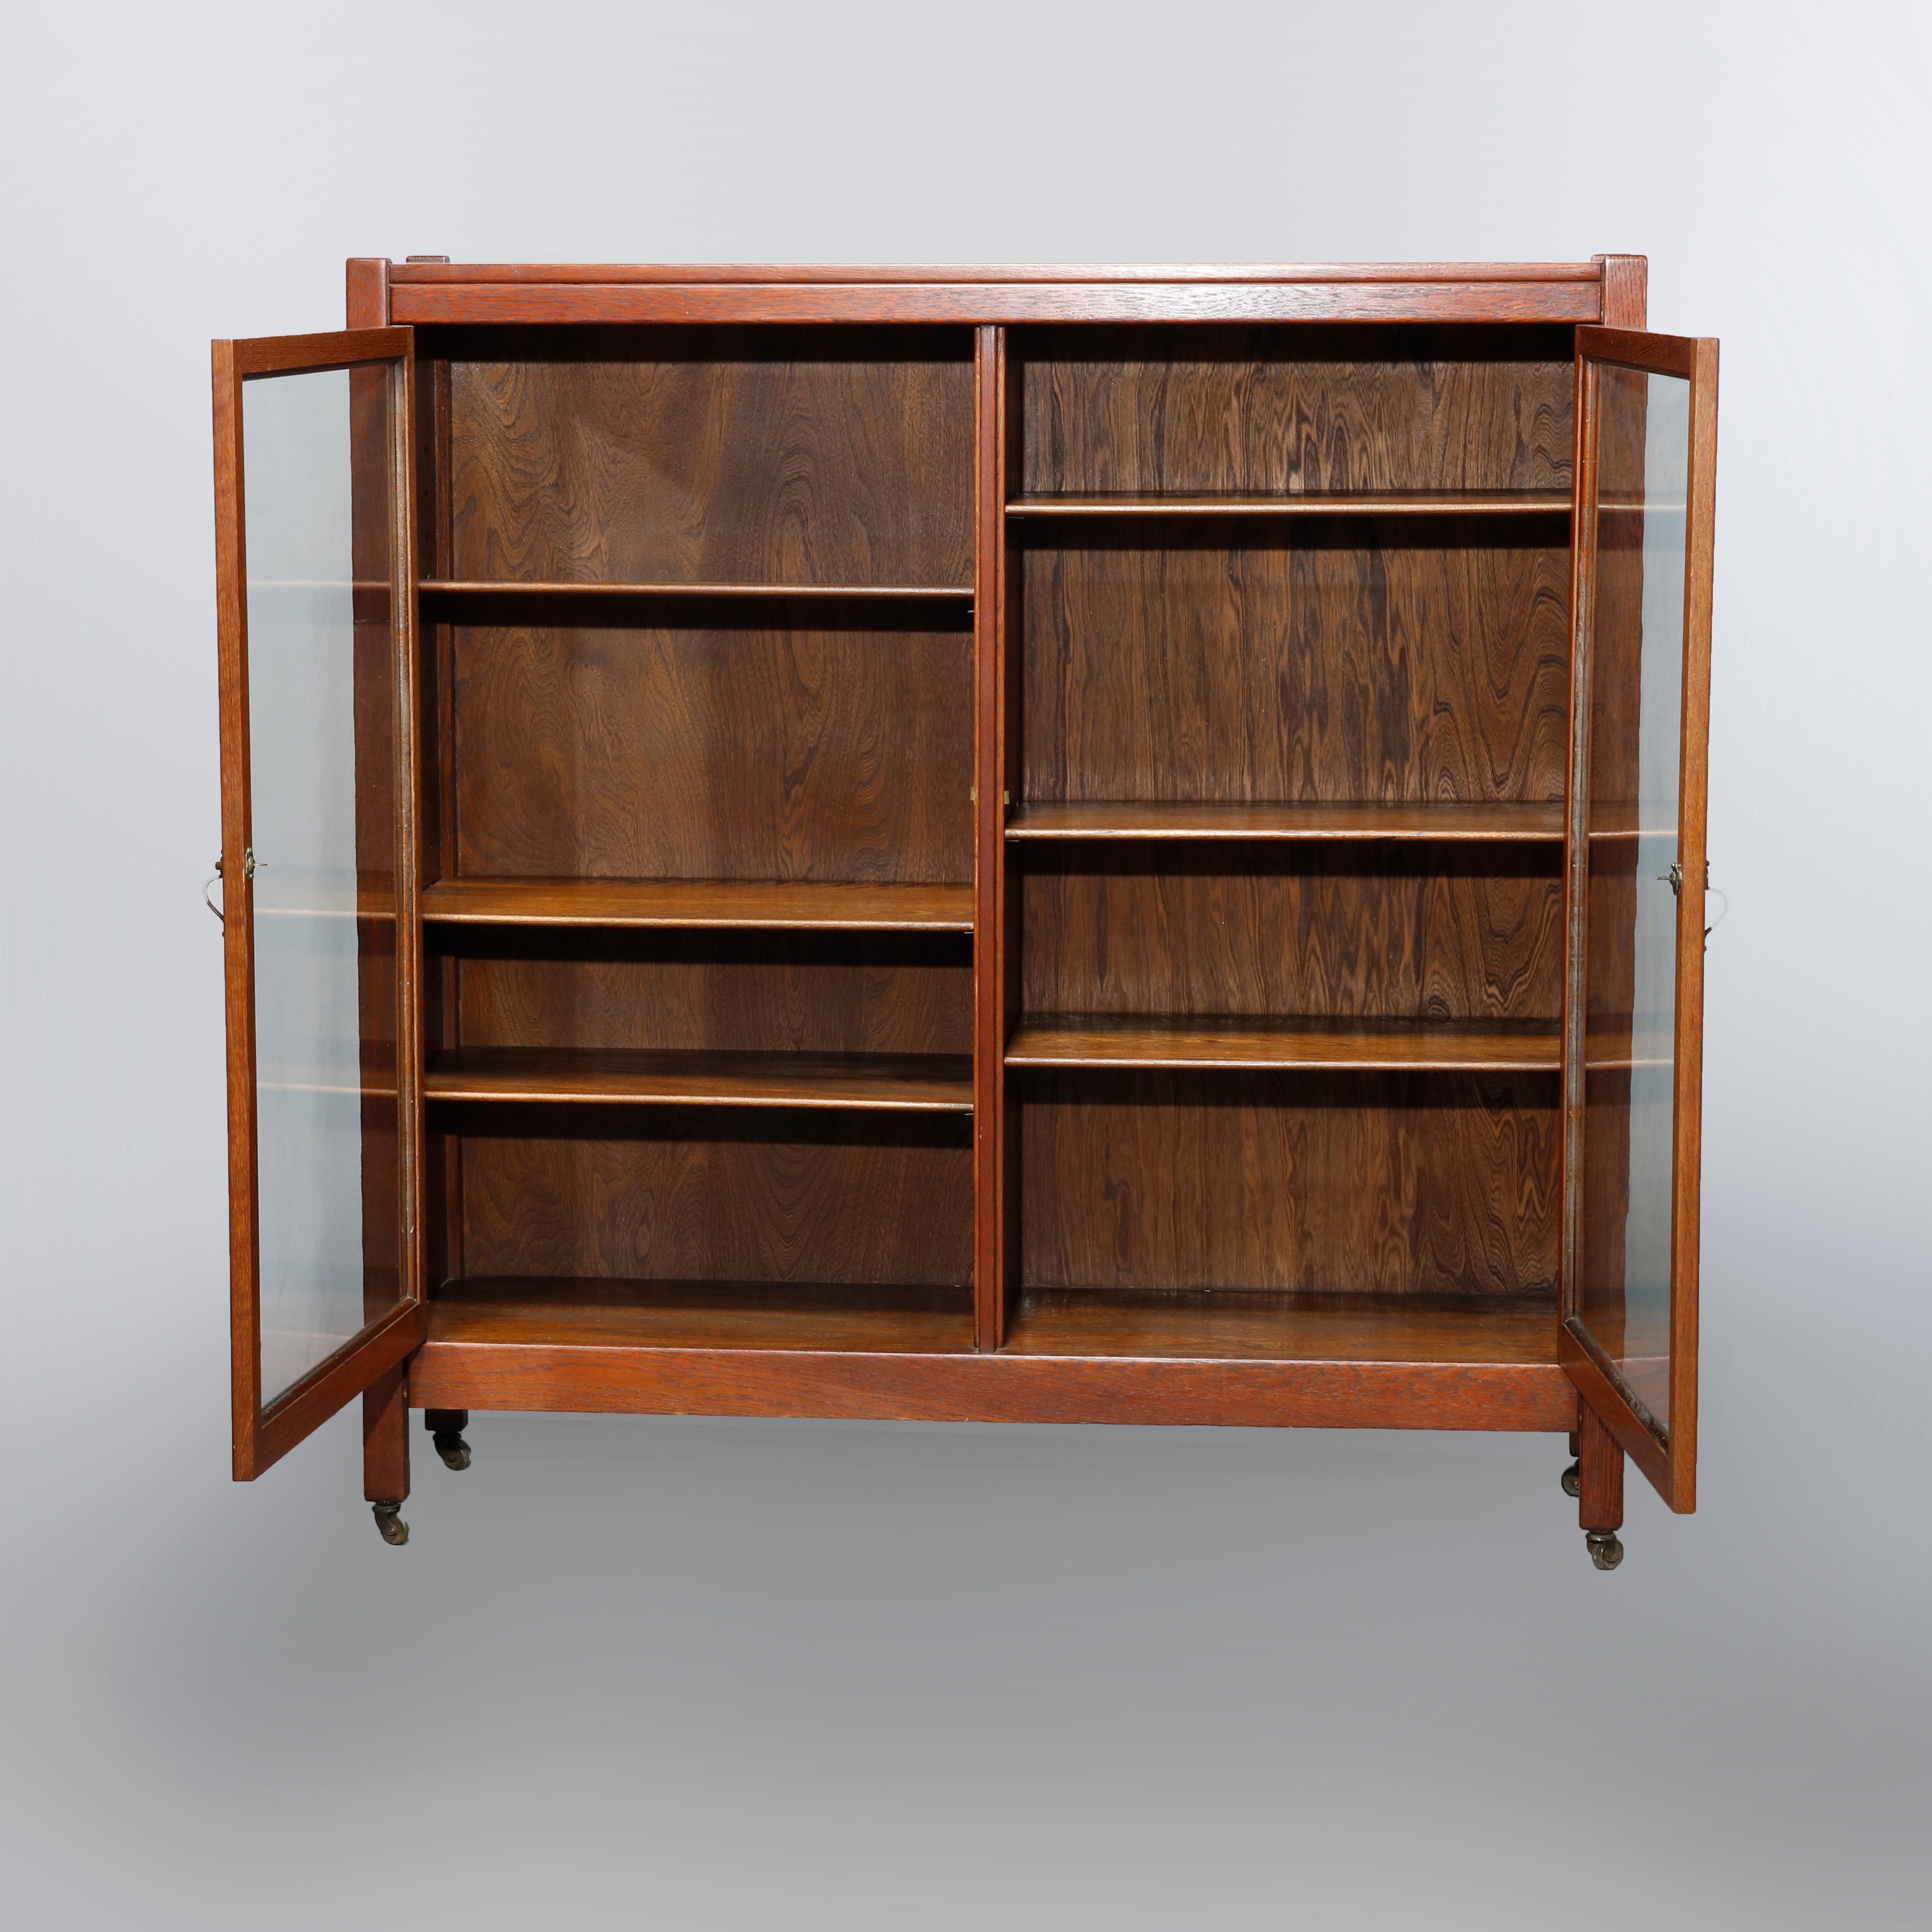 An antique Arts & Crafts Mission bookcase in the manner of Stickley offers quarter sawn oak construction with double glass doors opening to shelved interior and raised on straight and square legs, c1910

Measures: 49.75